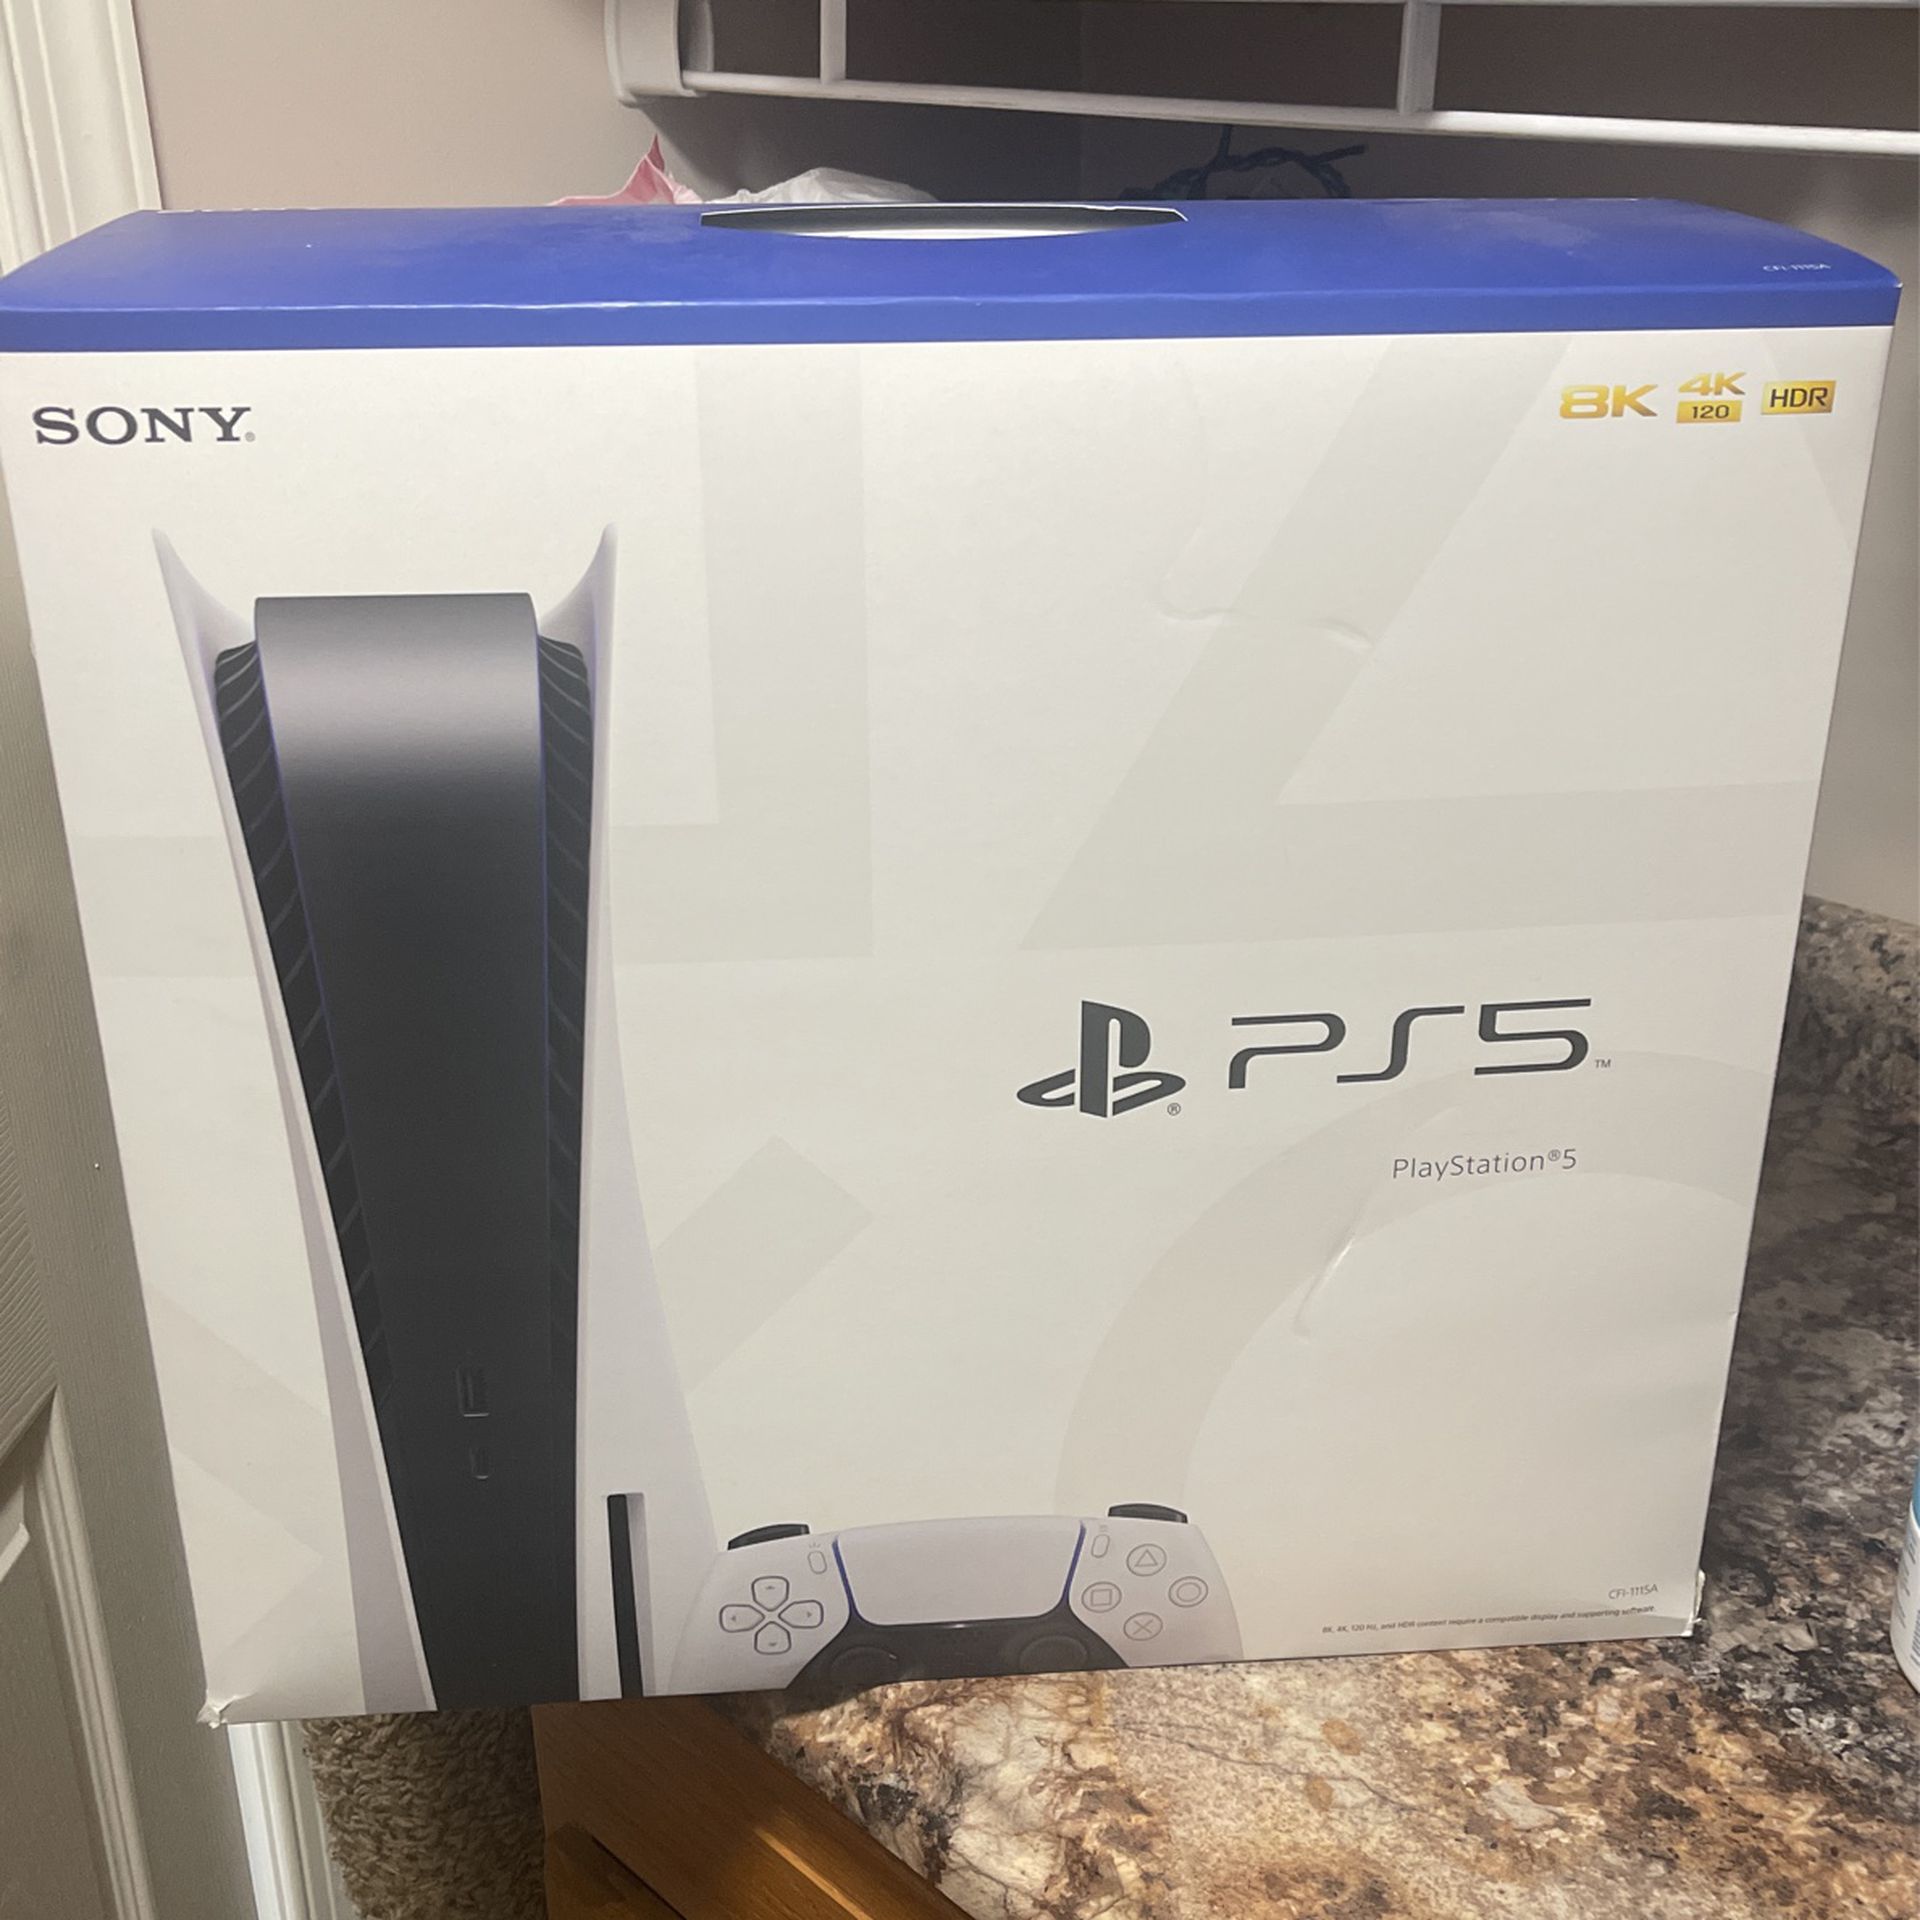  PlayStation5  Disc Edition .  Factory Sealed